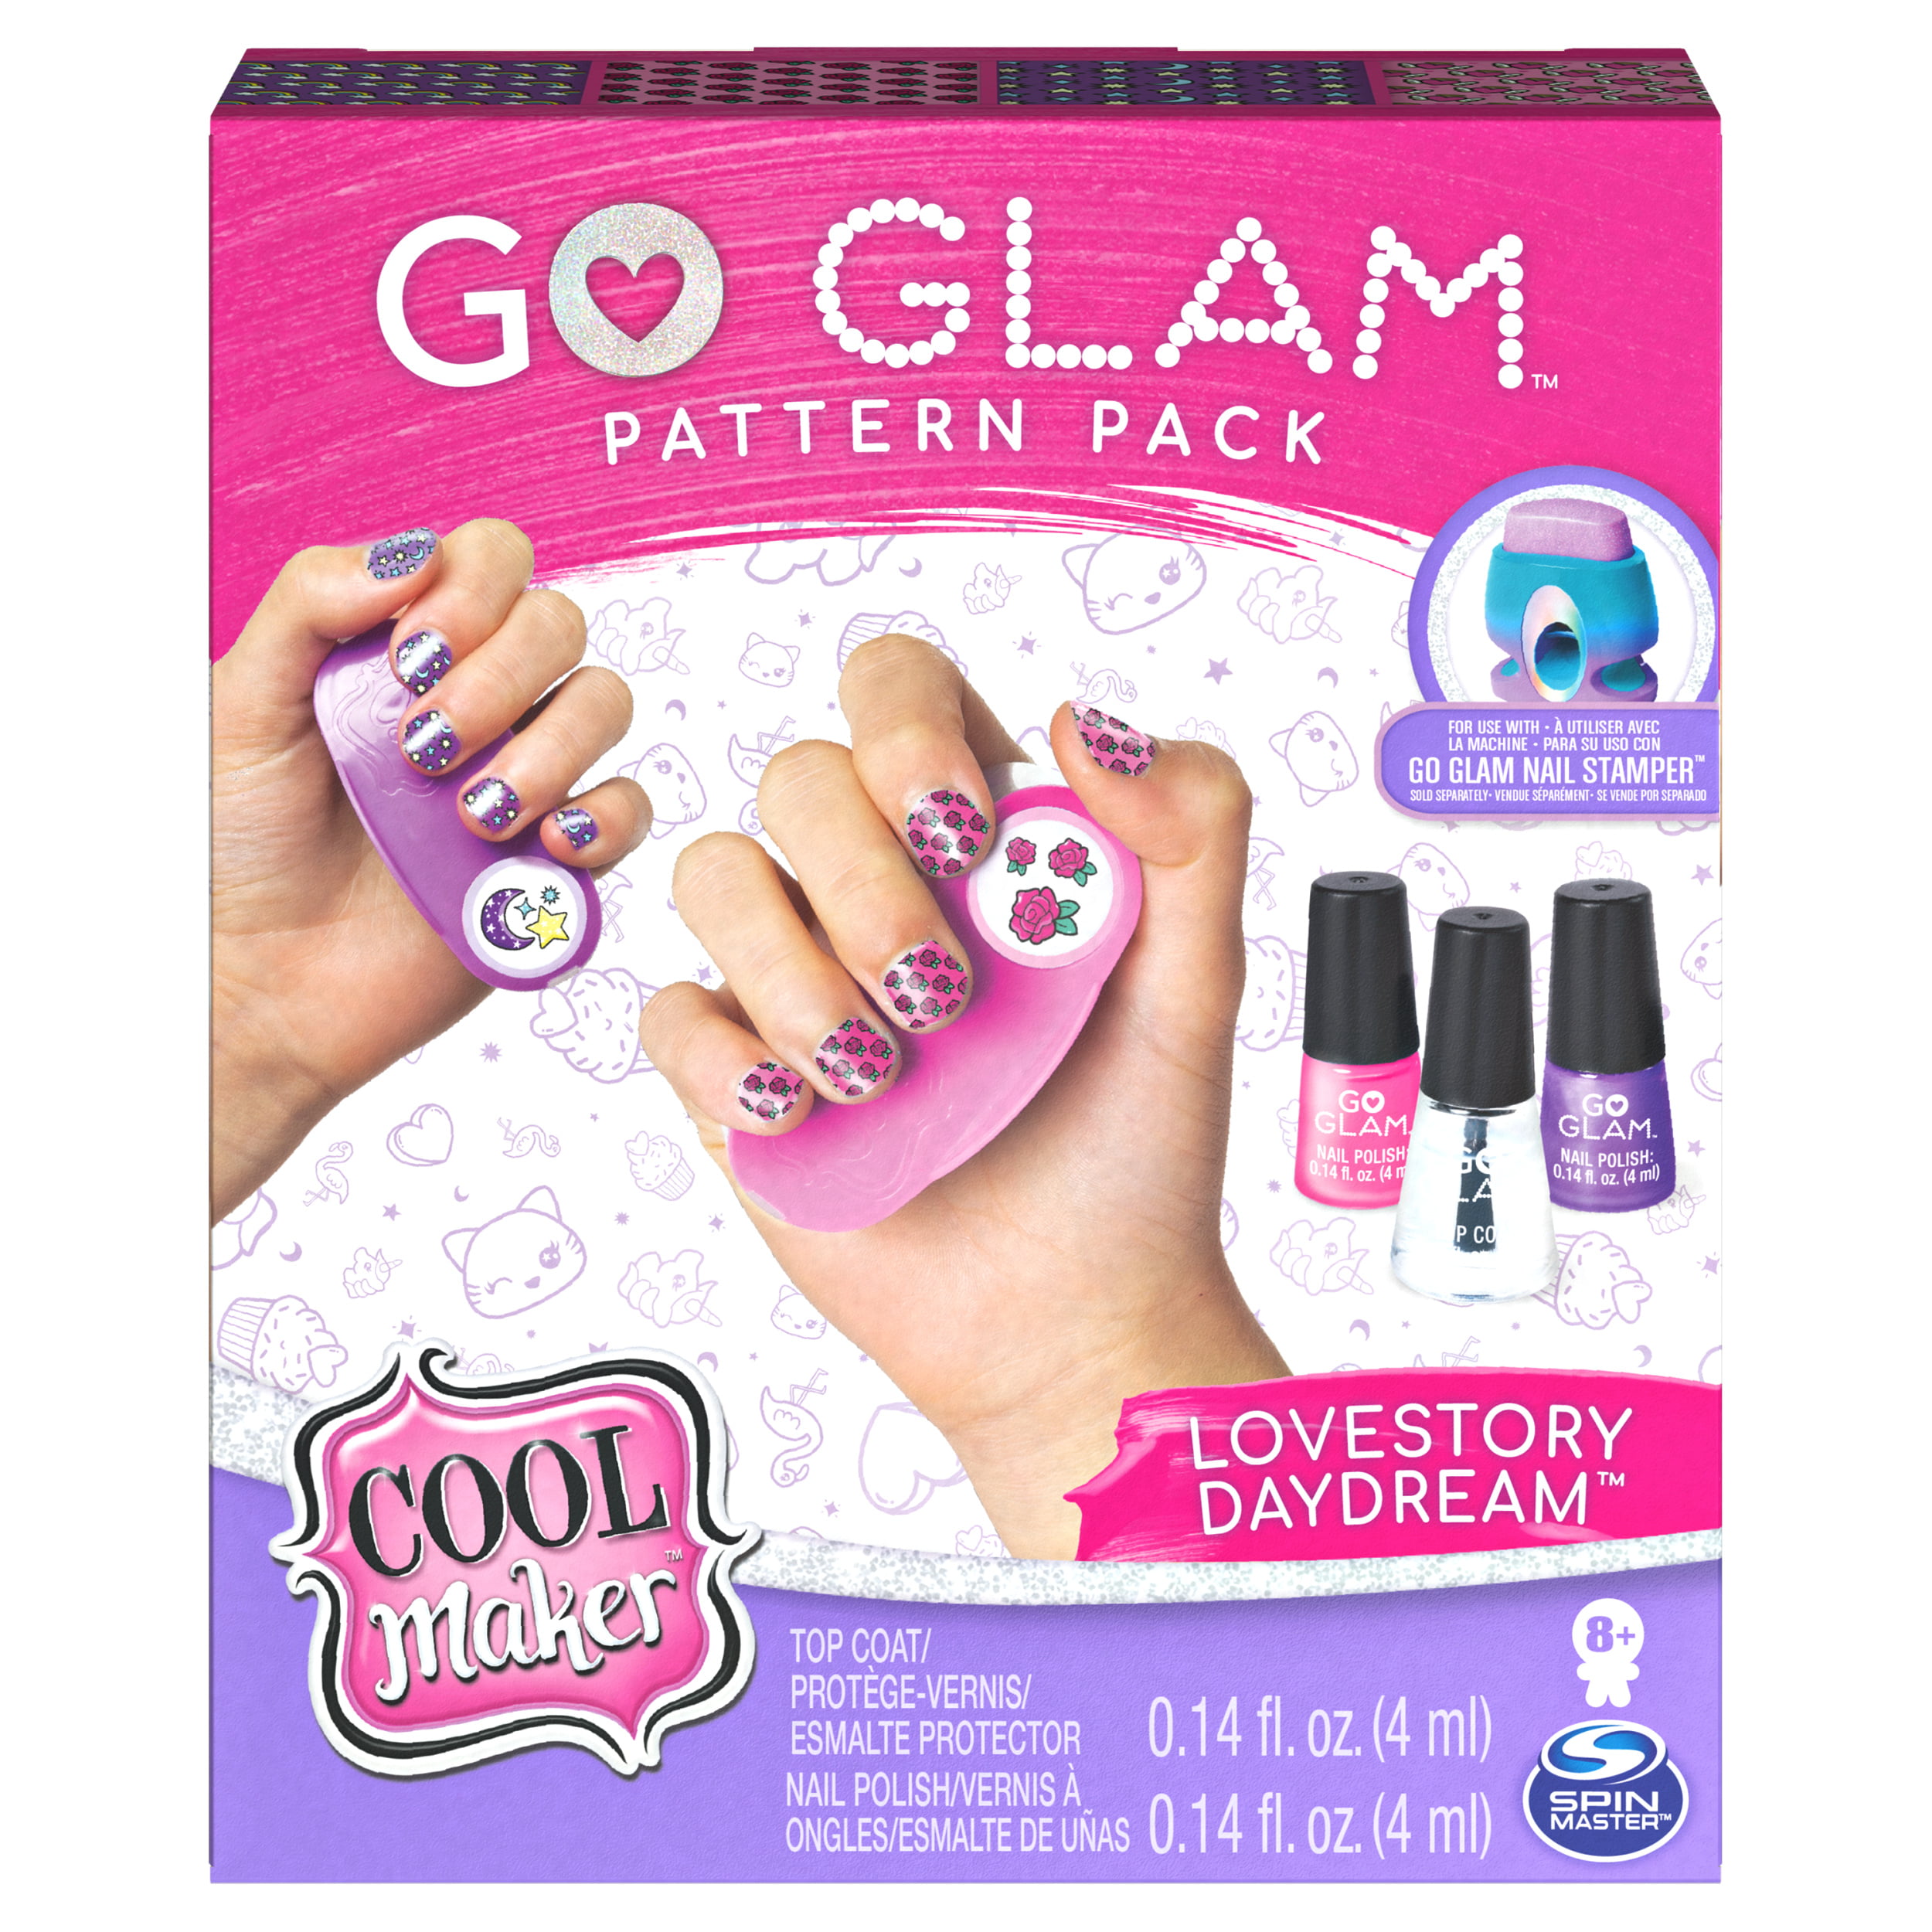 Cool Maker Go Glam Fashion Pack 